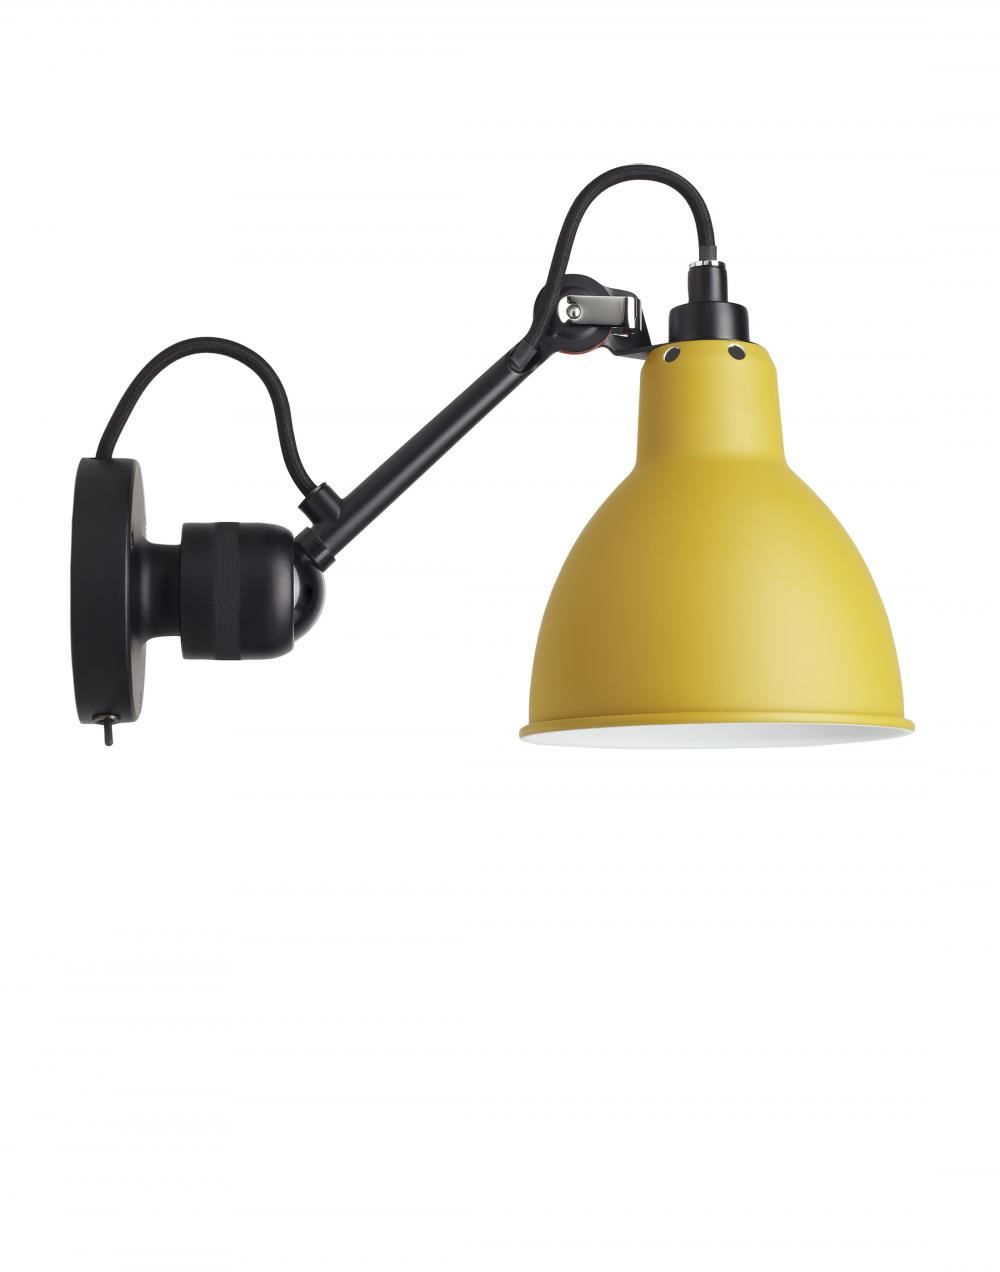 Lampe Gras 304 Small Wall Light Black Arm Yellow Shade Round Integral Switch